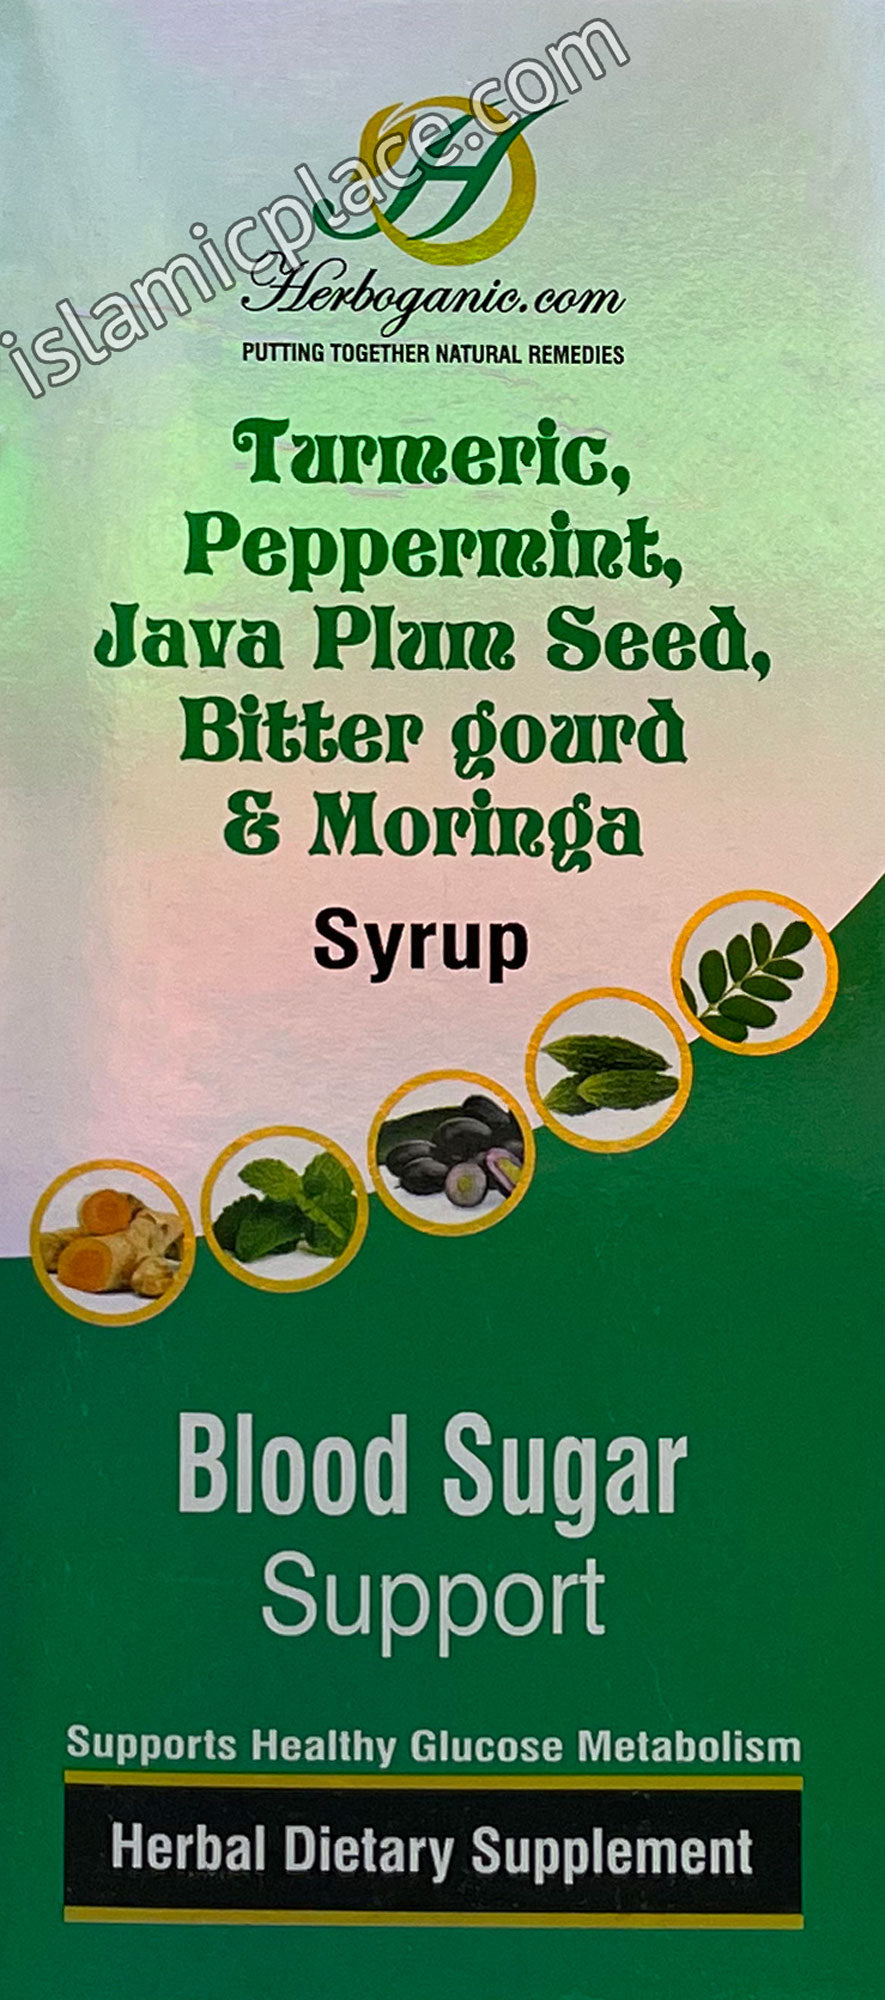 Blood Sugar Support Syrup - Turmeric, Peppermint, Java Plum Seed, Bitter gourd & Moringa